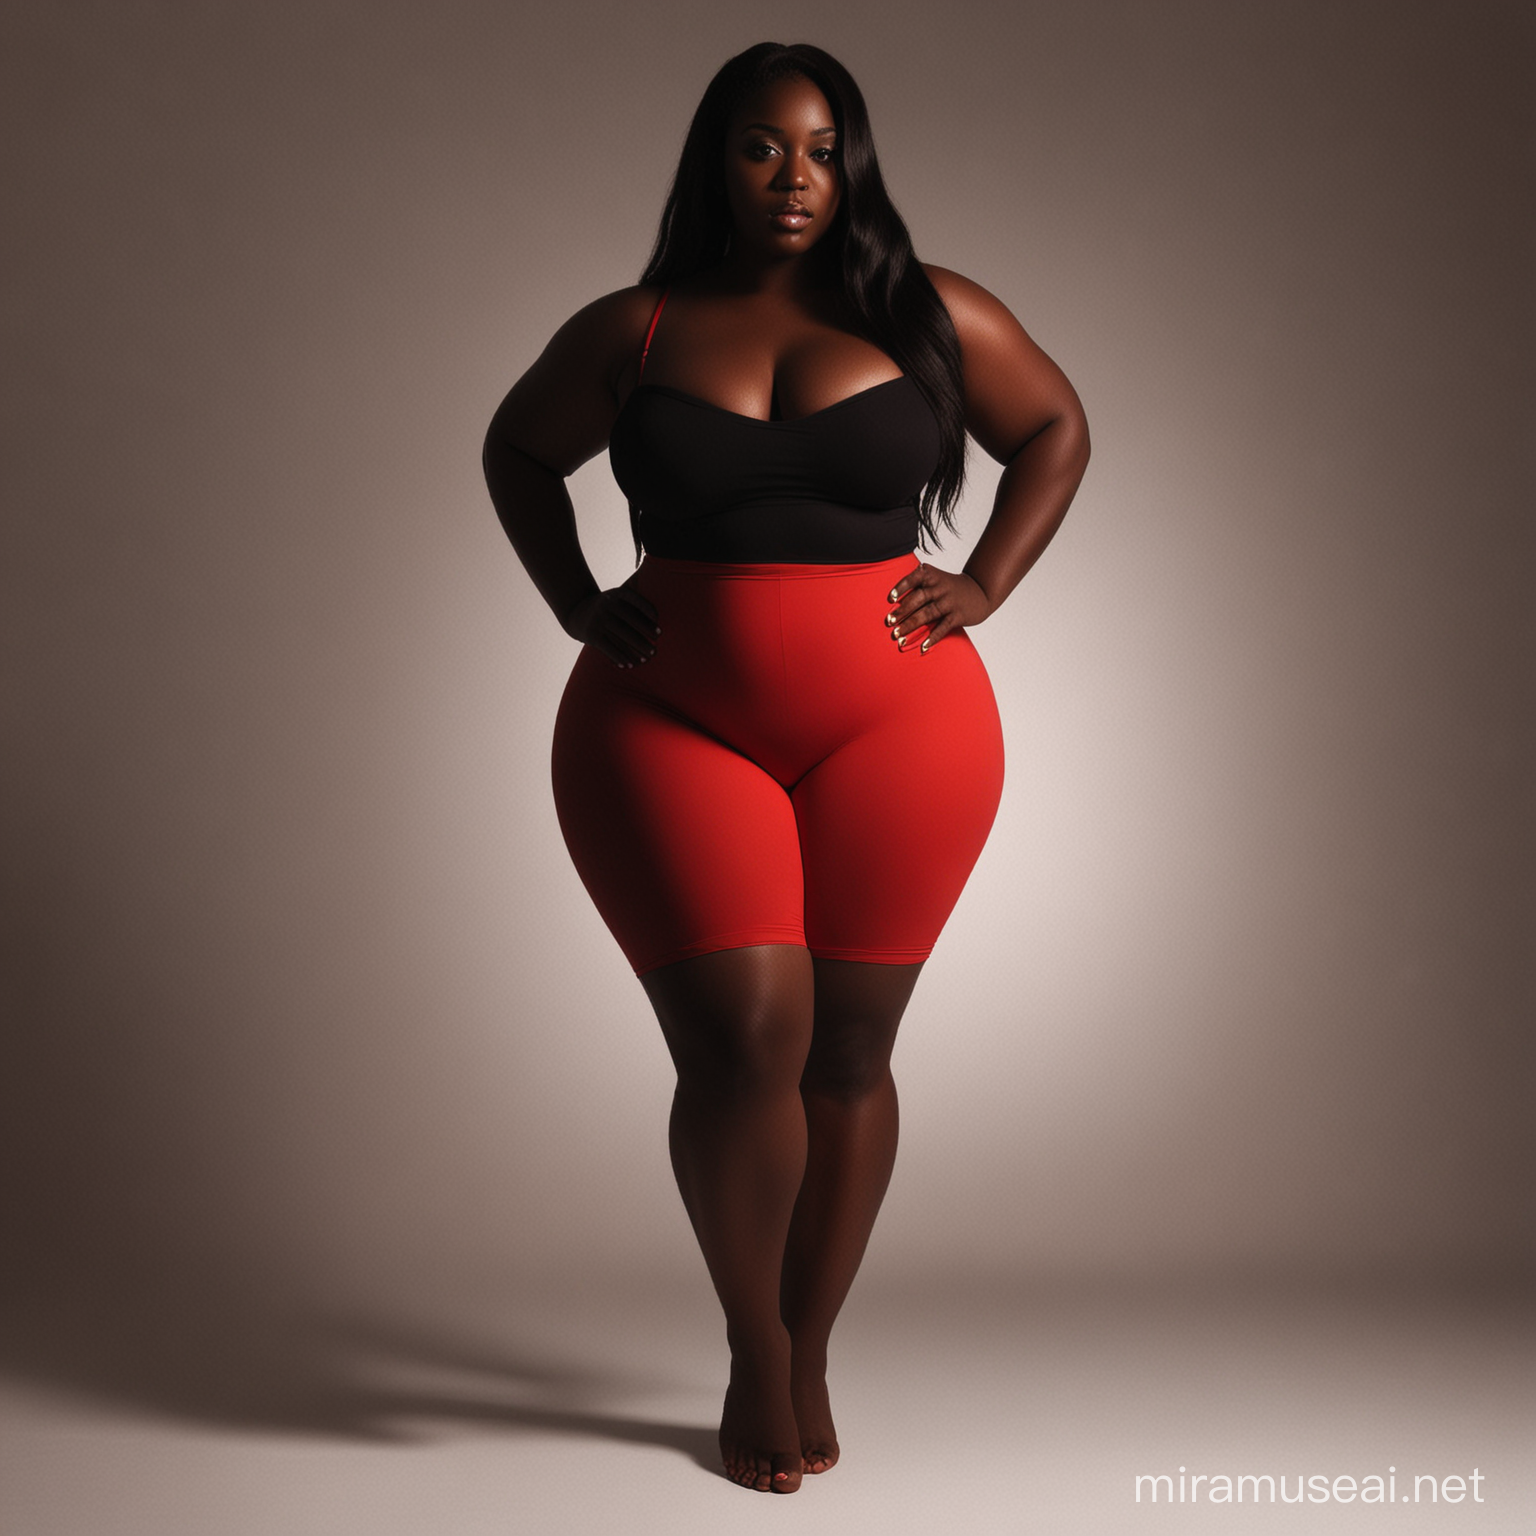 Image prompt/: generate red silhouette pictures in a dark room, full body, curvy and thick black girl (plus size), with long straight weave

